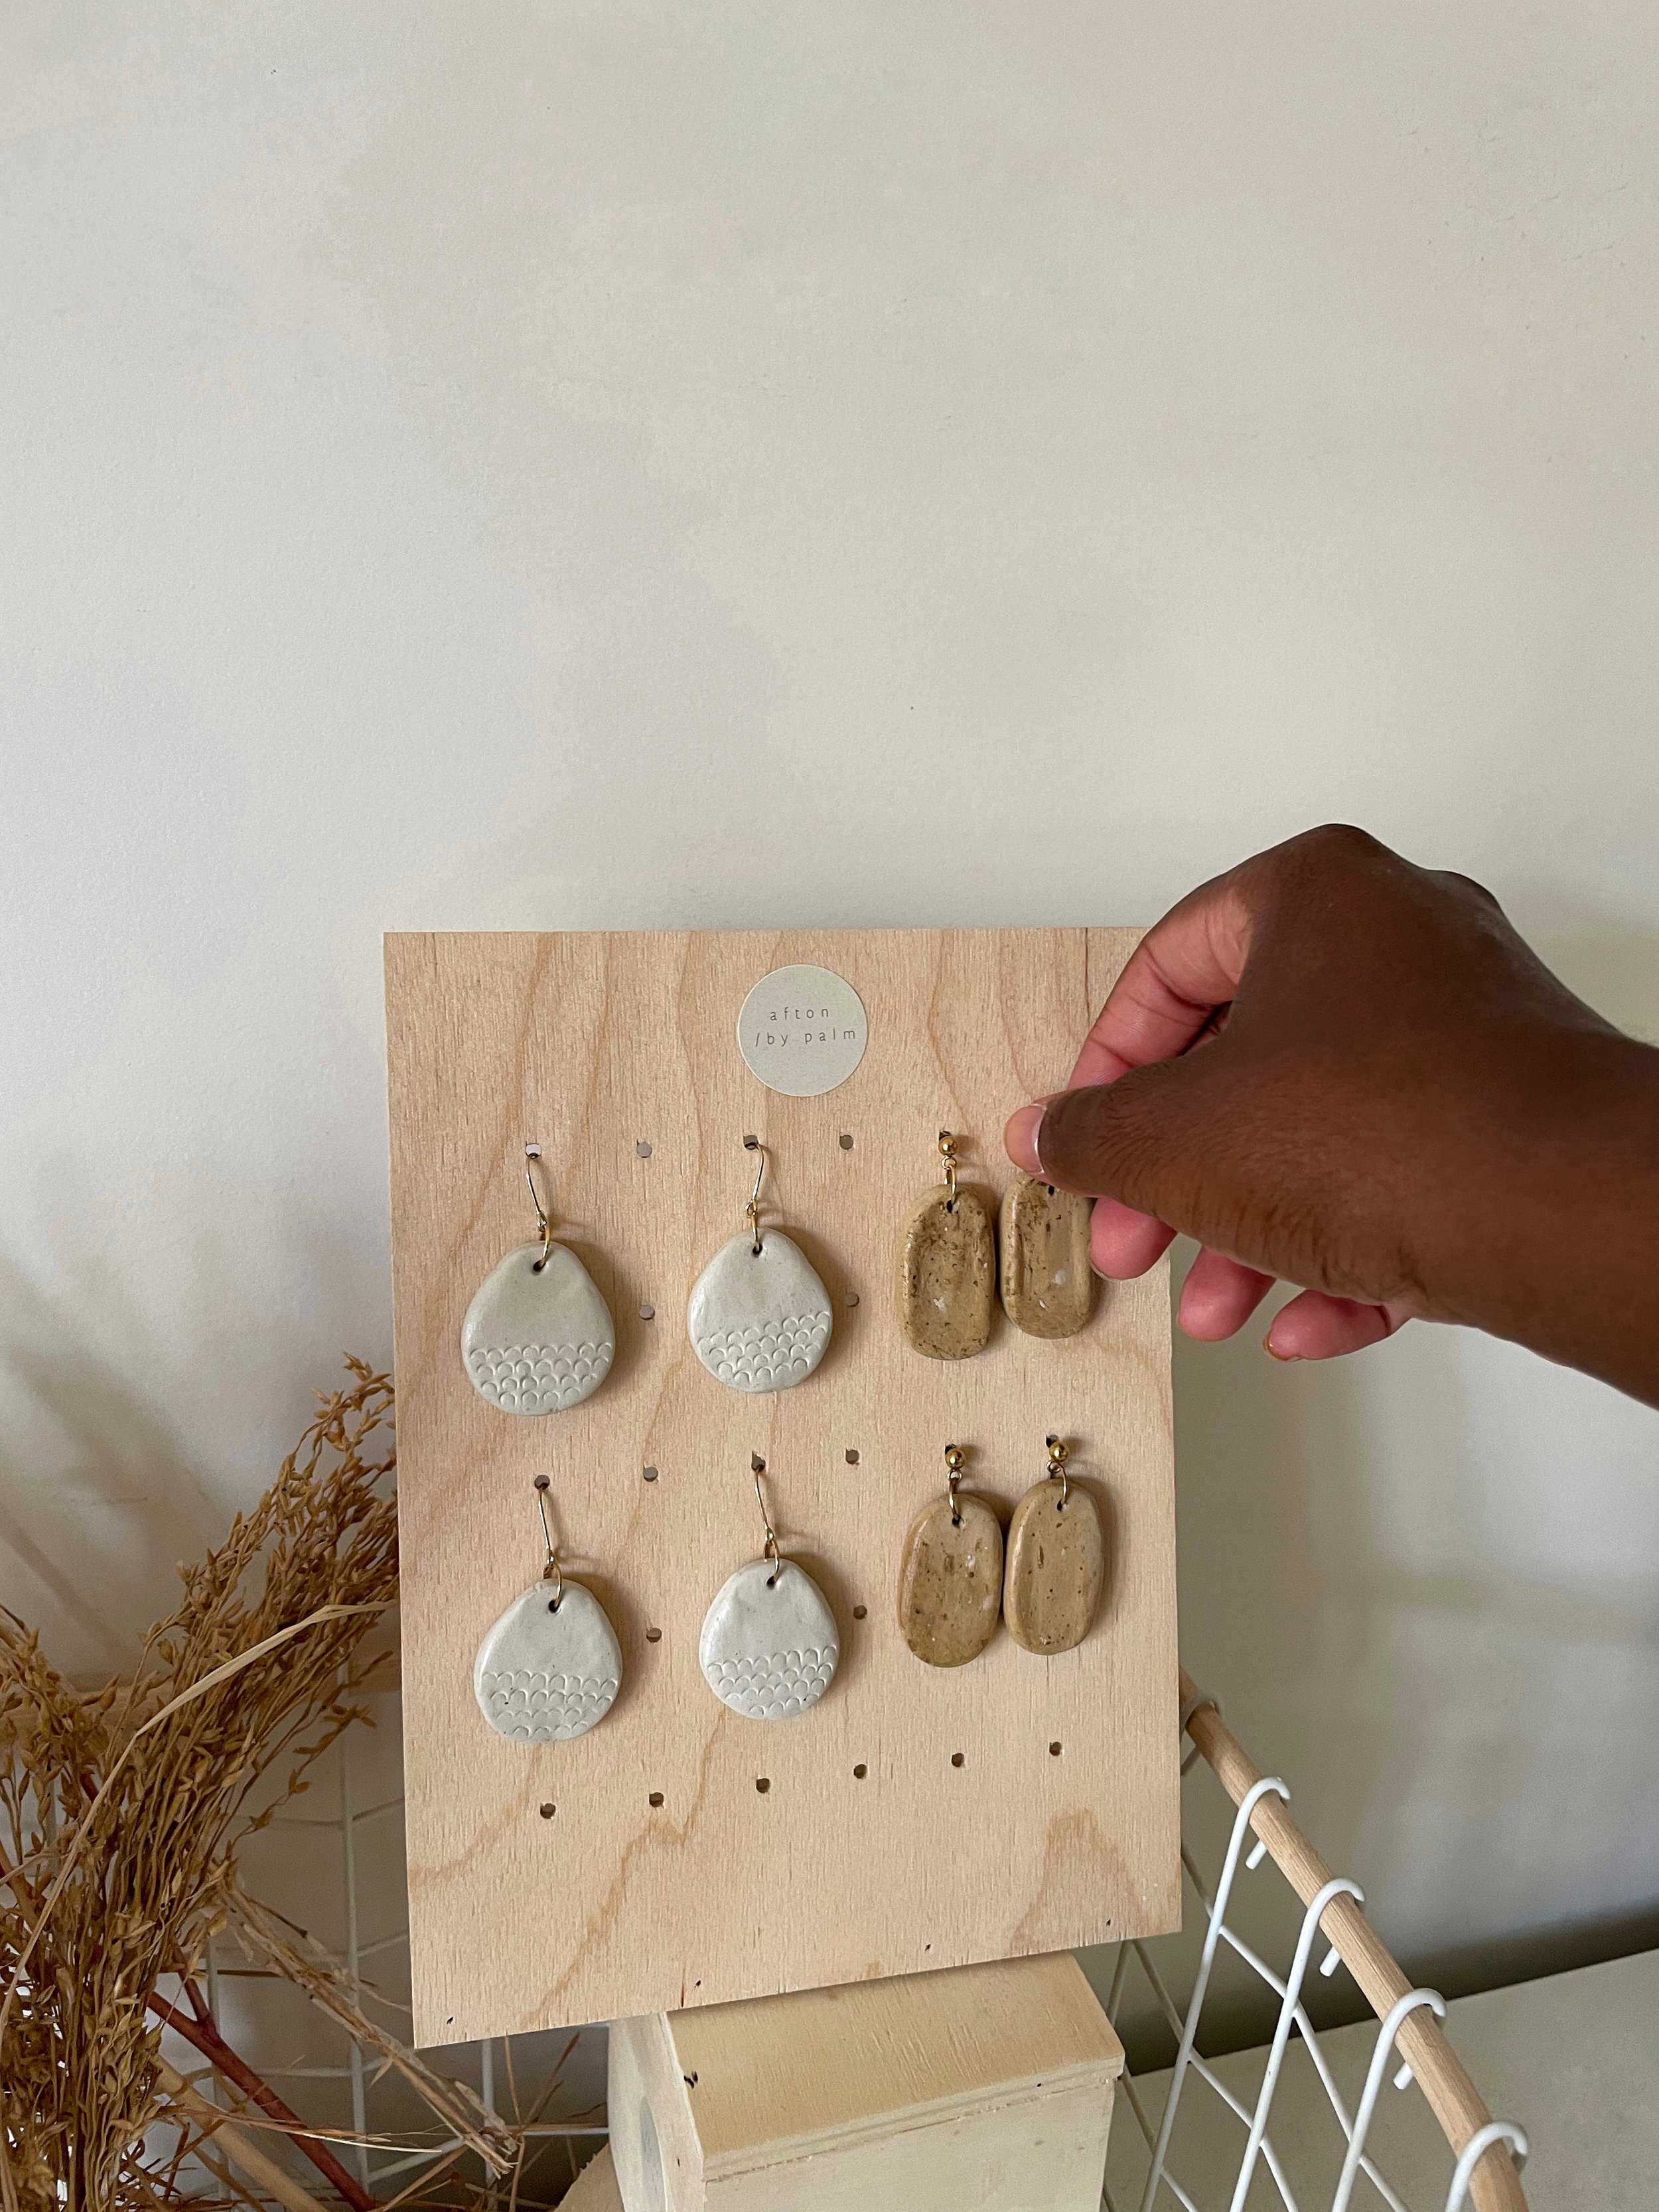 Clay minimal earrings by Afton by Palm in the maker's Buckinghamshire studio